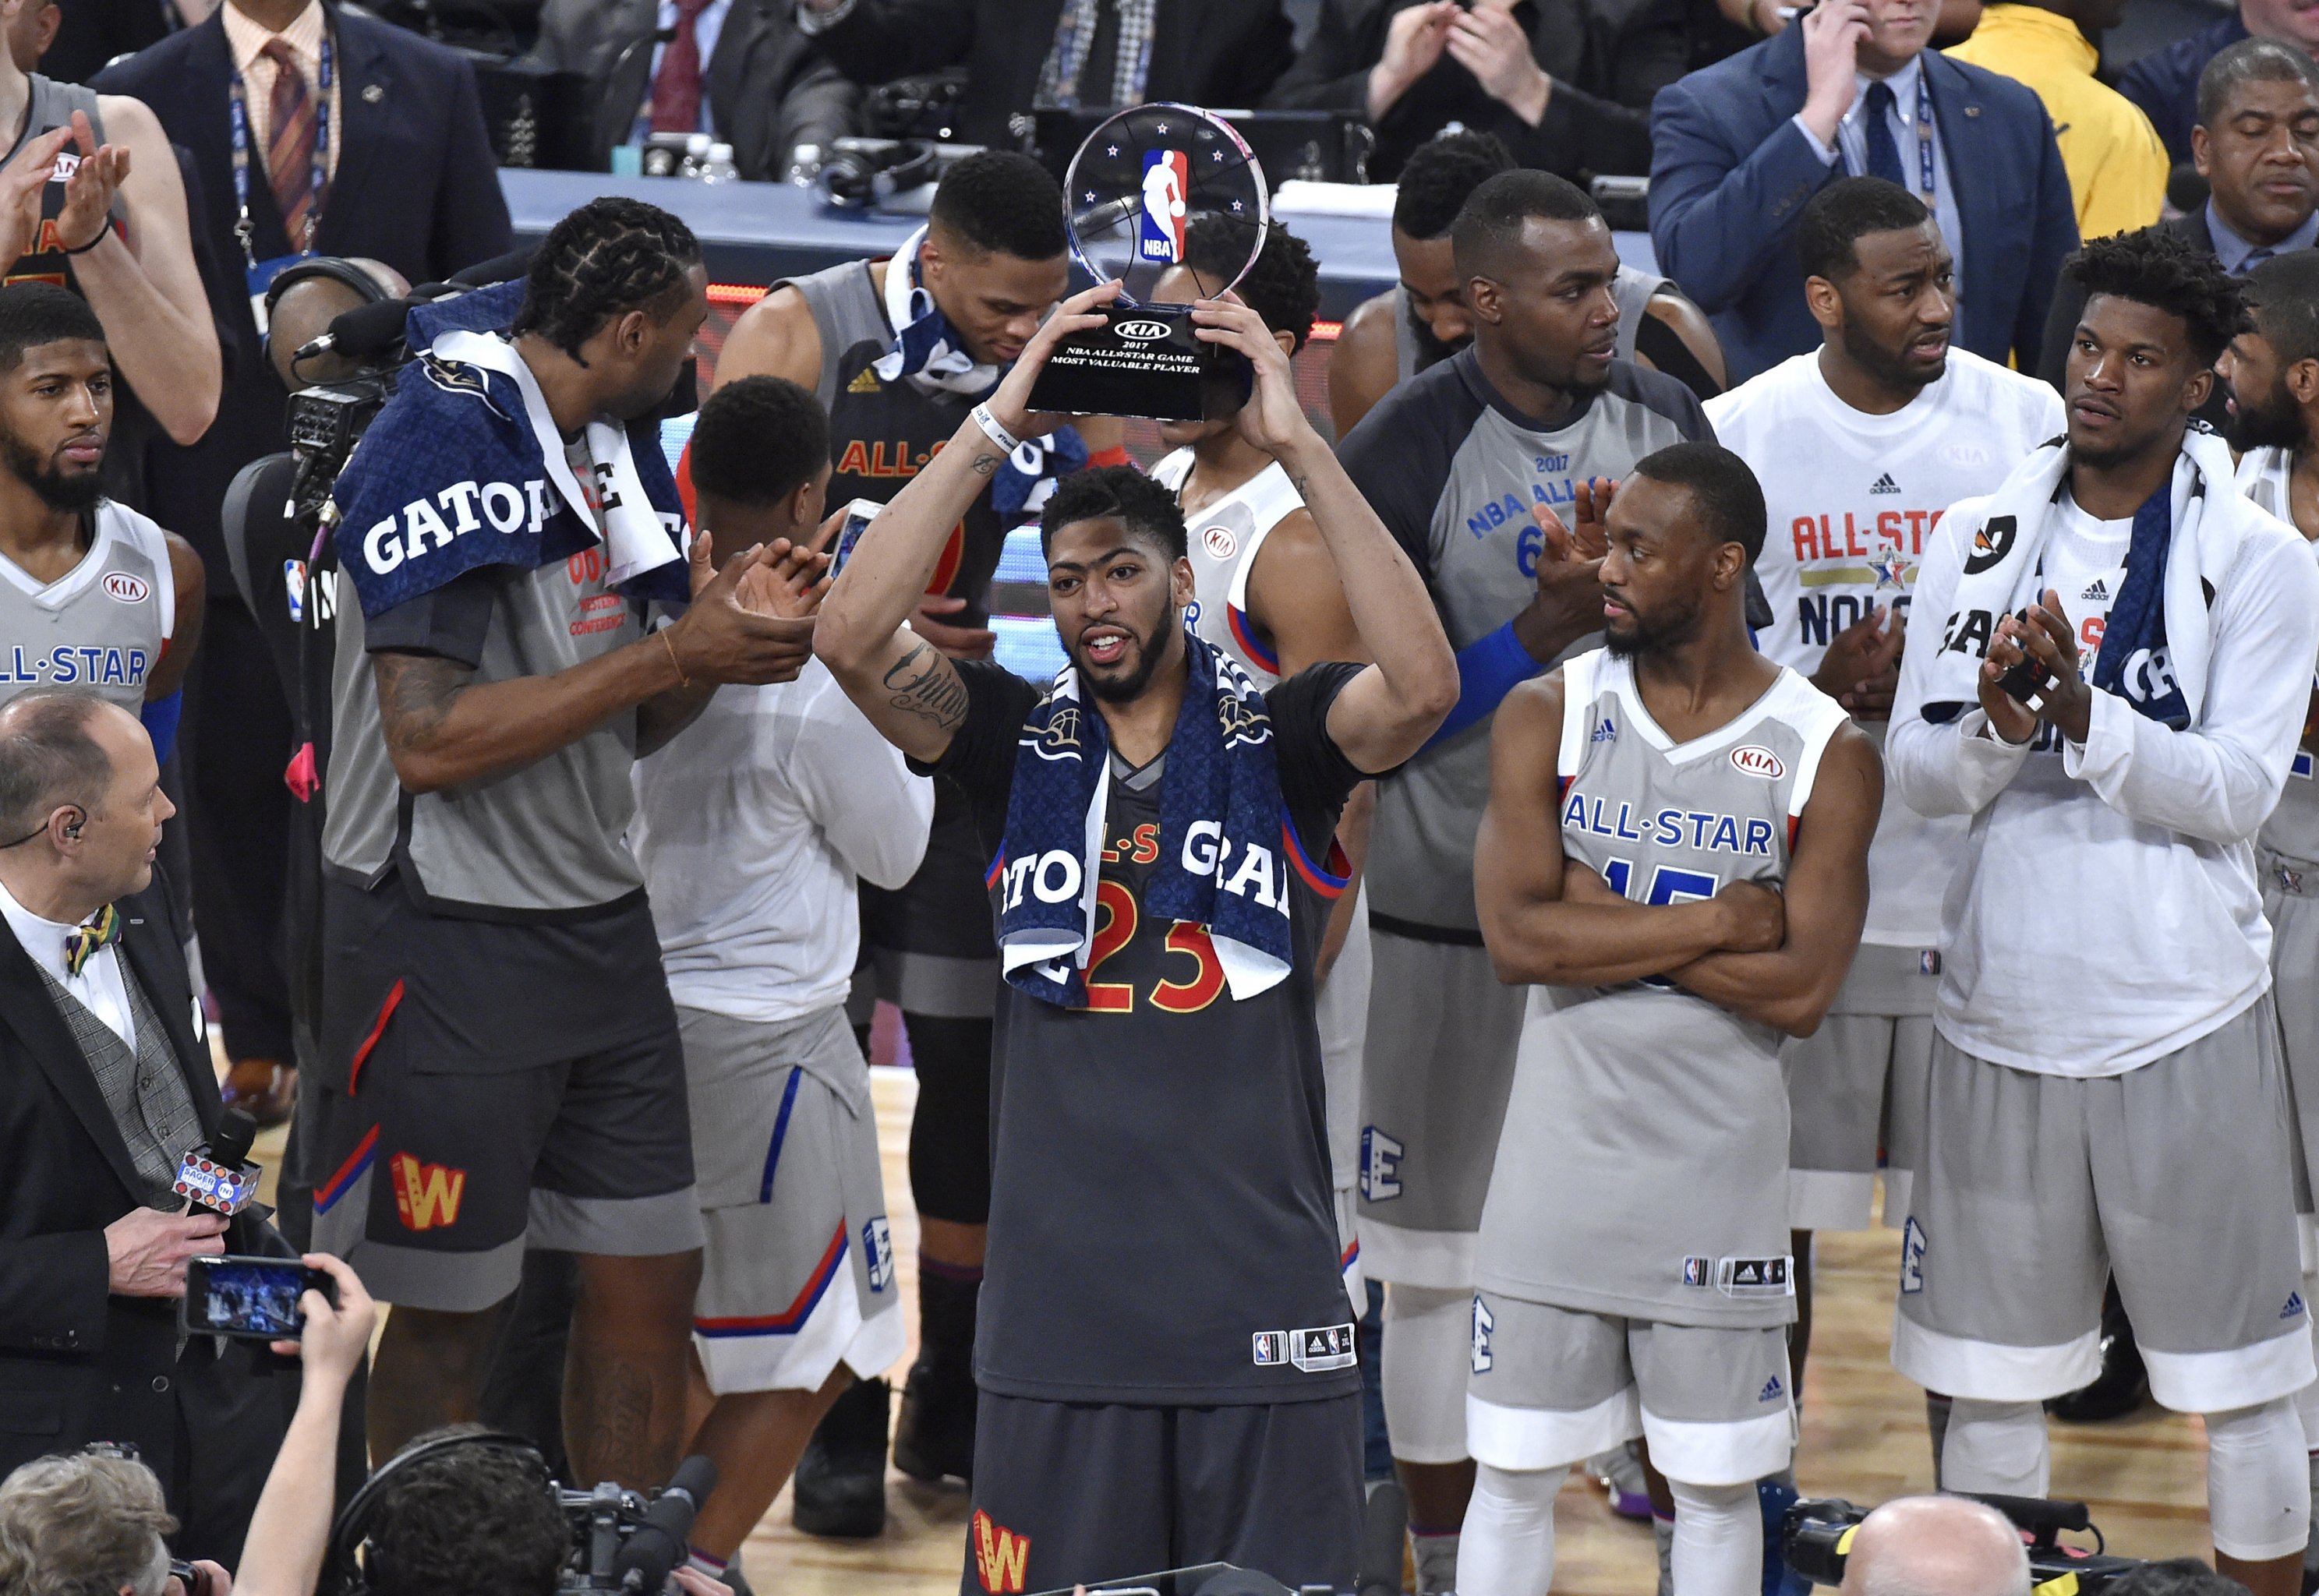 NBA All-Star History: Game recaps, box scores, rosters, MVPs and